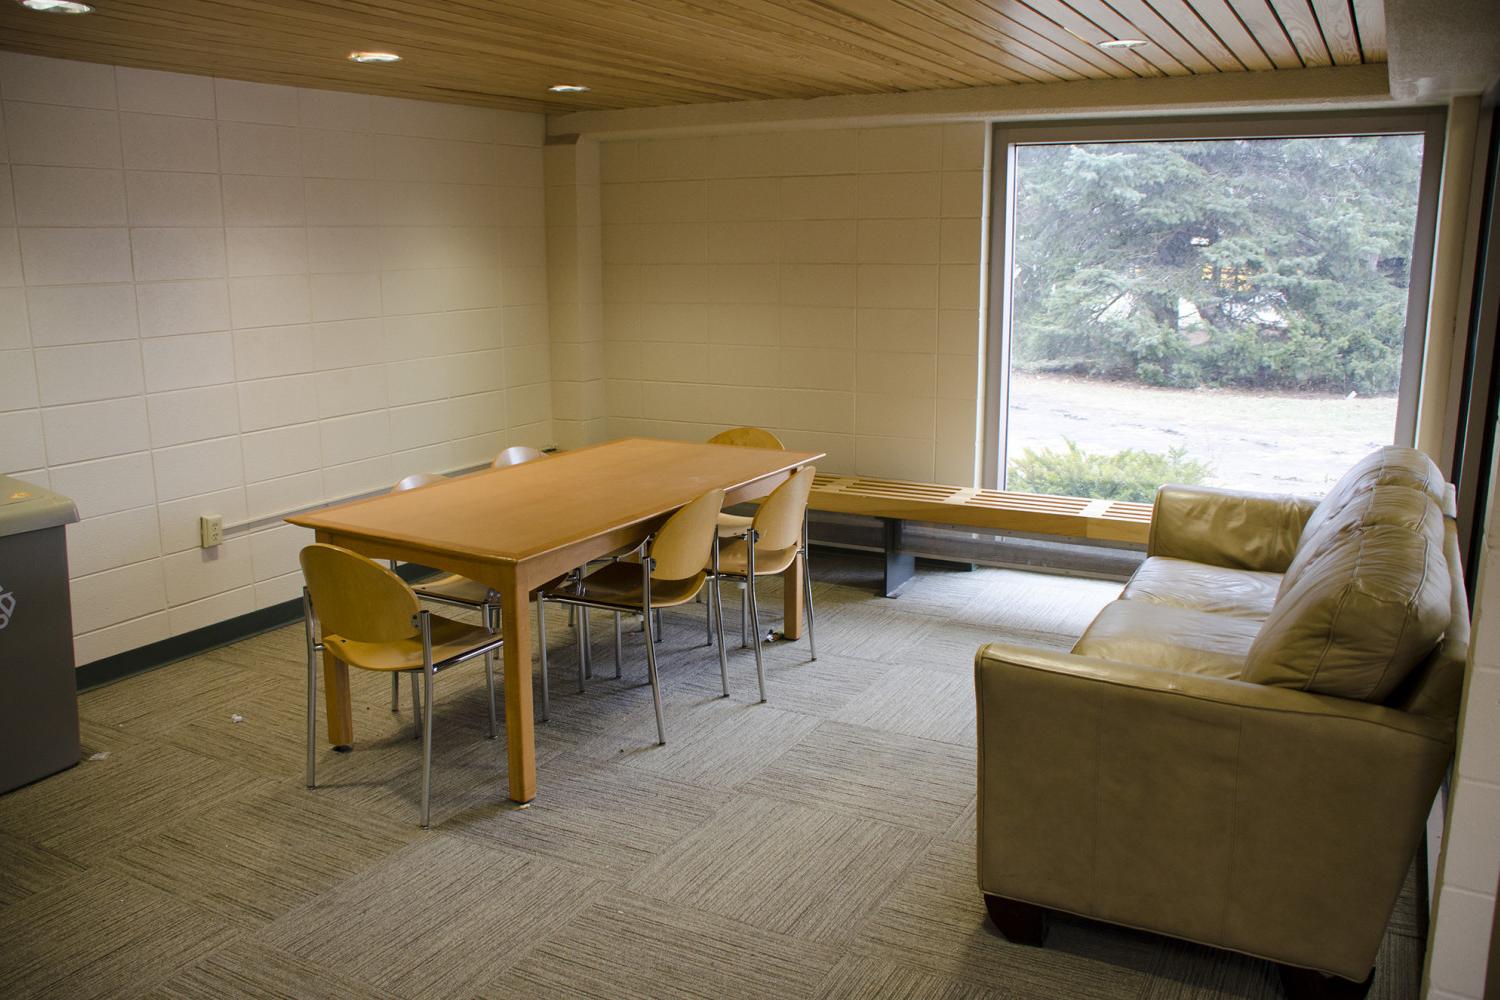 Madrigrano Hall offers a lounge for students on every floor.